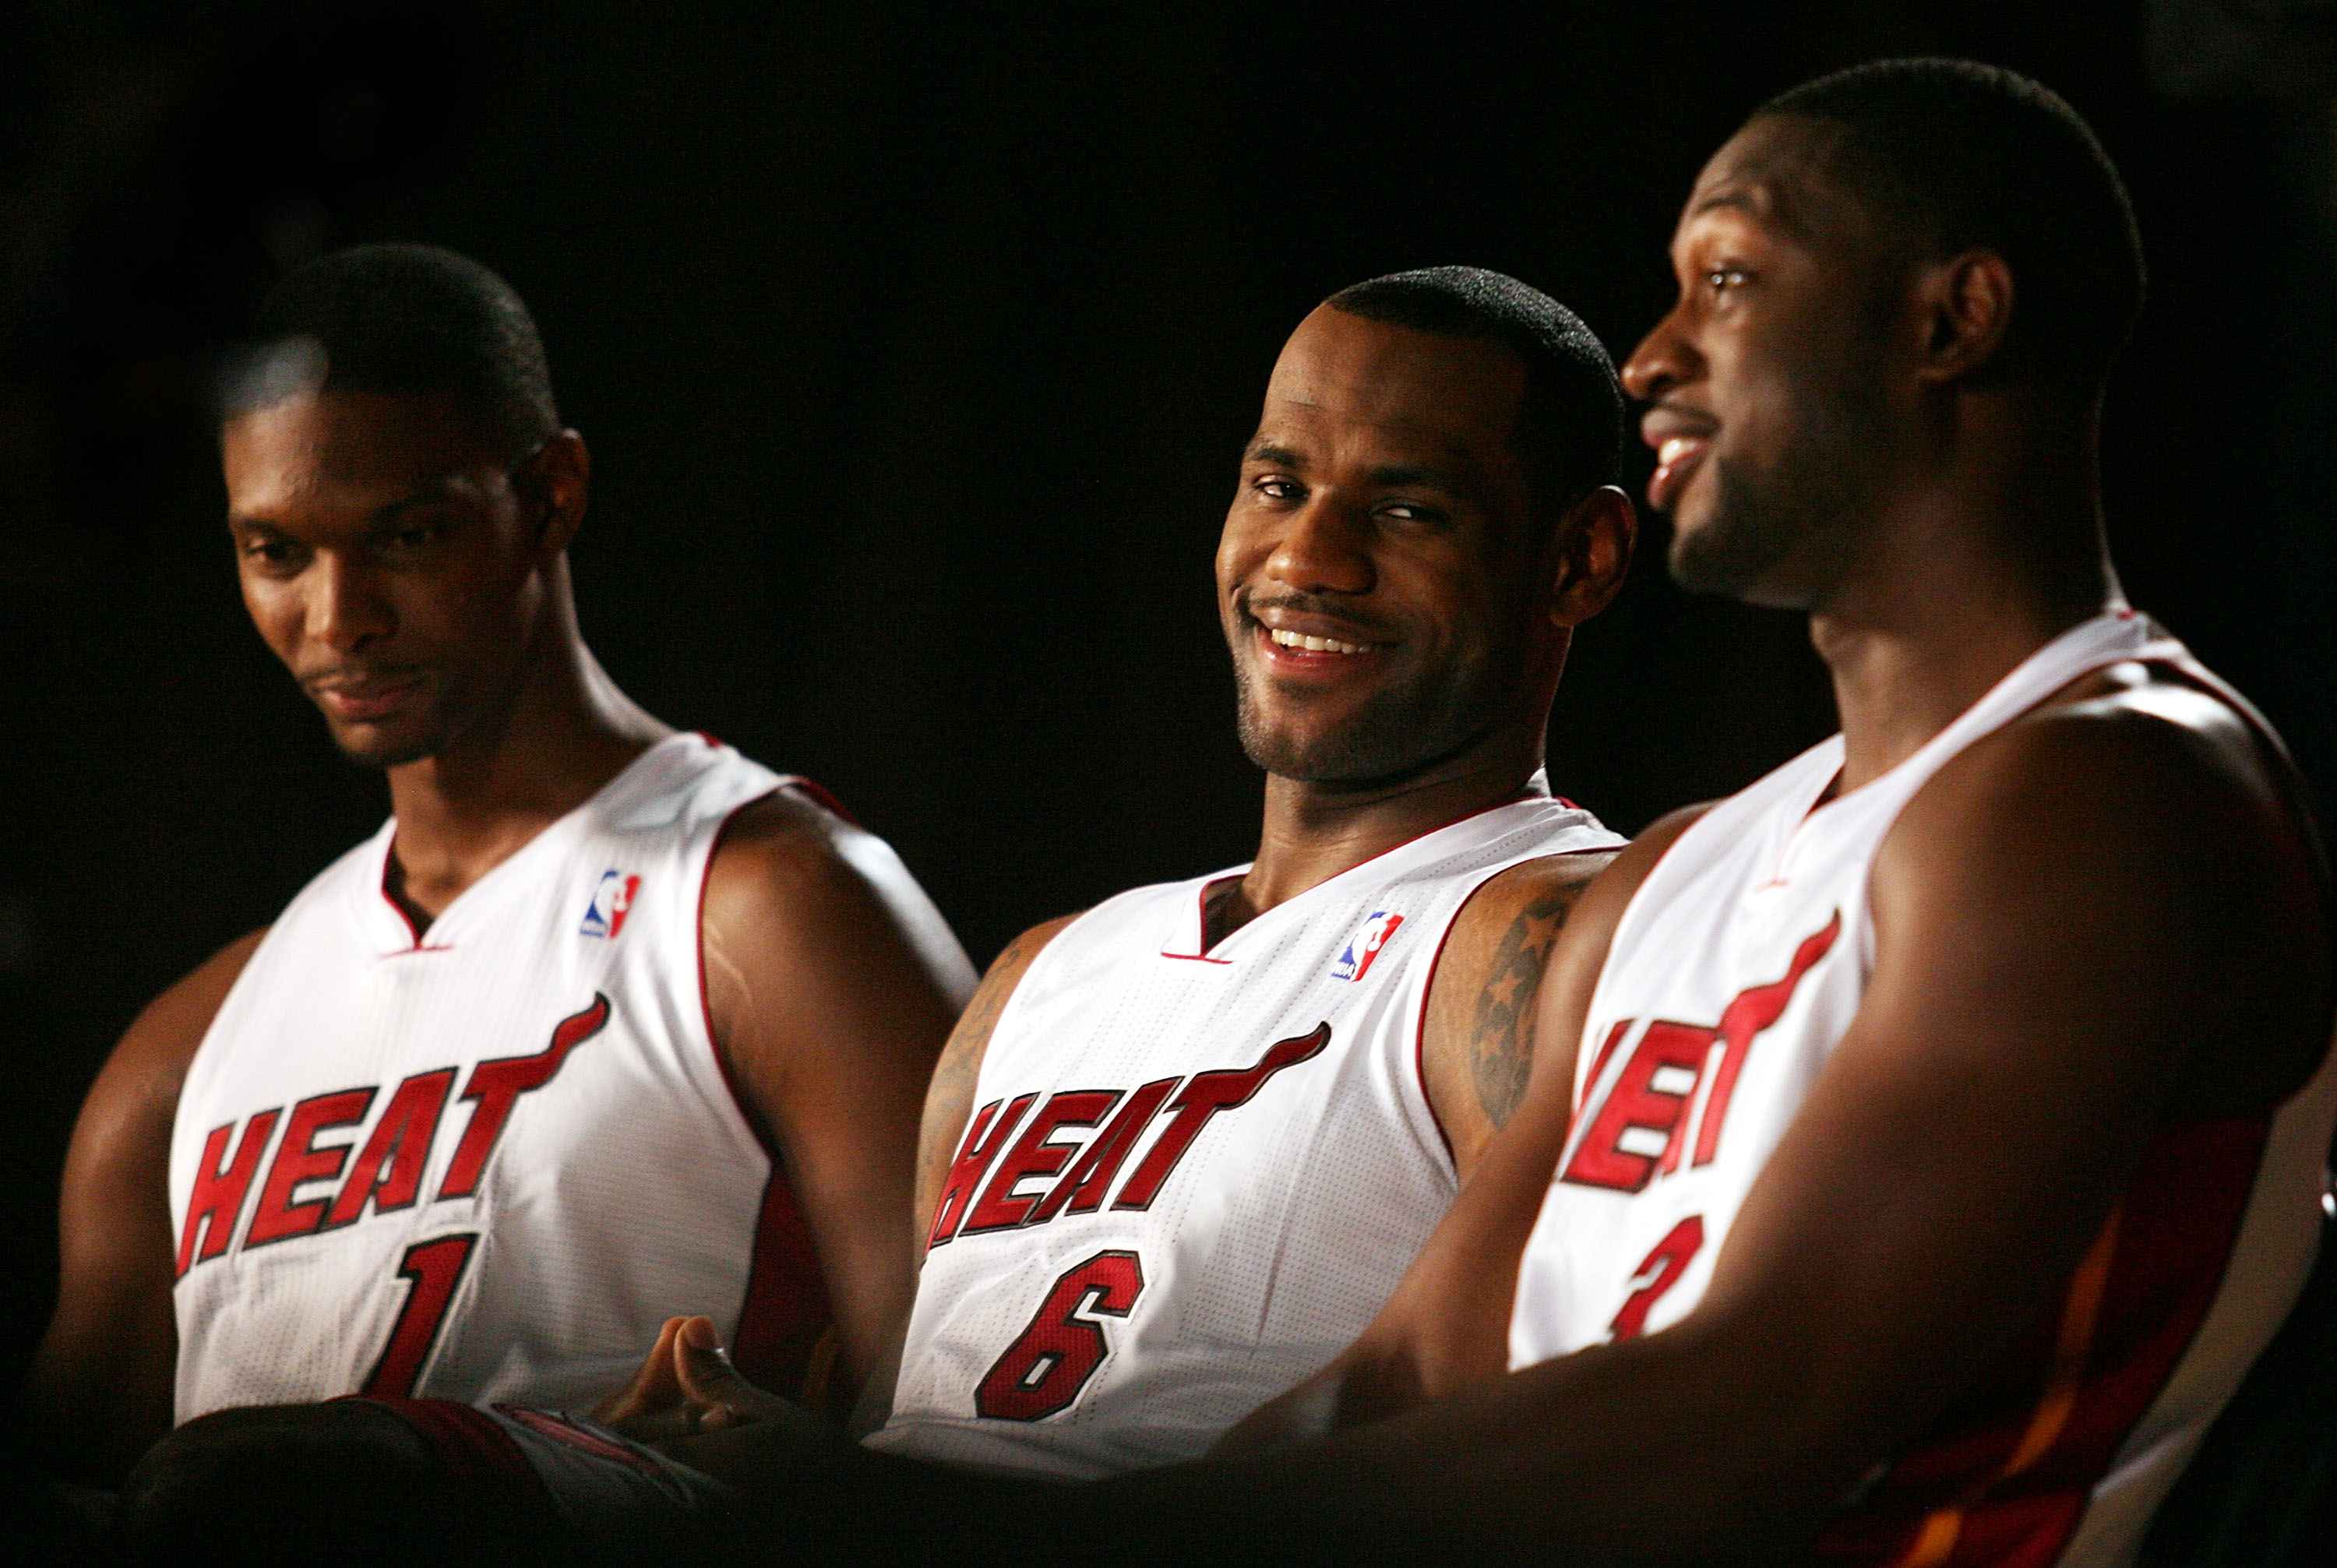 MIAMI - SEPTEMBER 27:  (L-R) Chris Bosh, LeBron James and Dwyane Wade of the Miami Heat answer questions during media day at the Bank United Center on September 27, 2010 in Miami, Florida.  (Photo by Marc Serota/Getty Images)